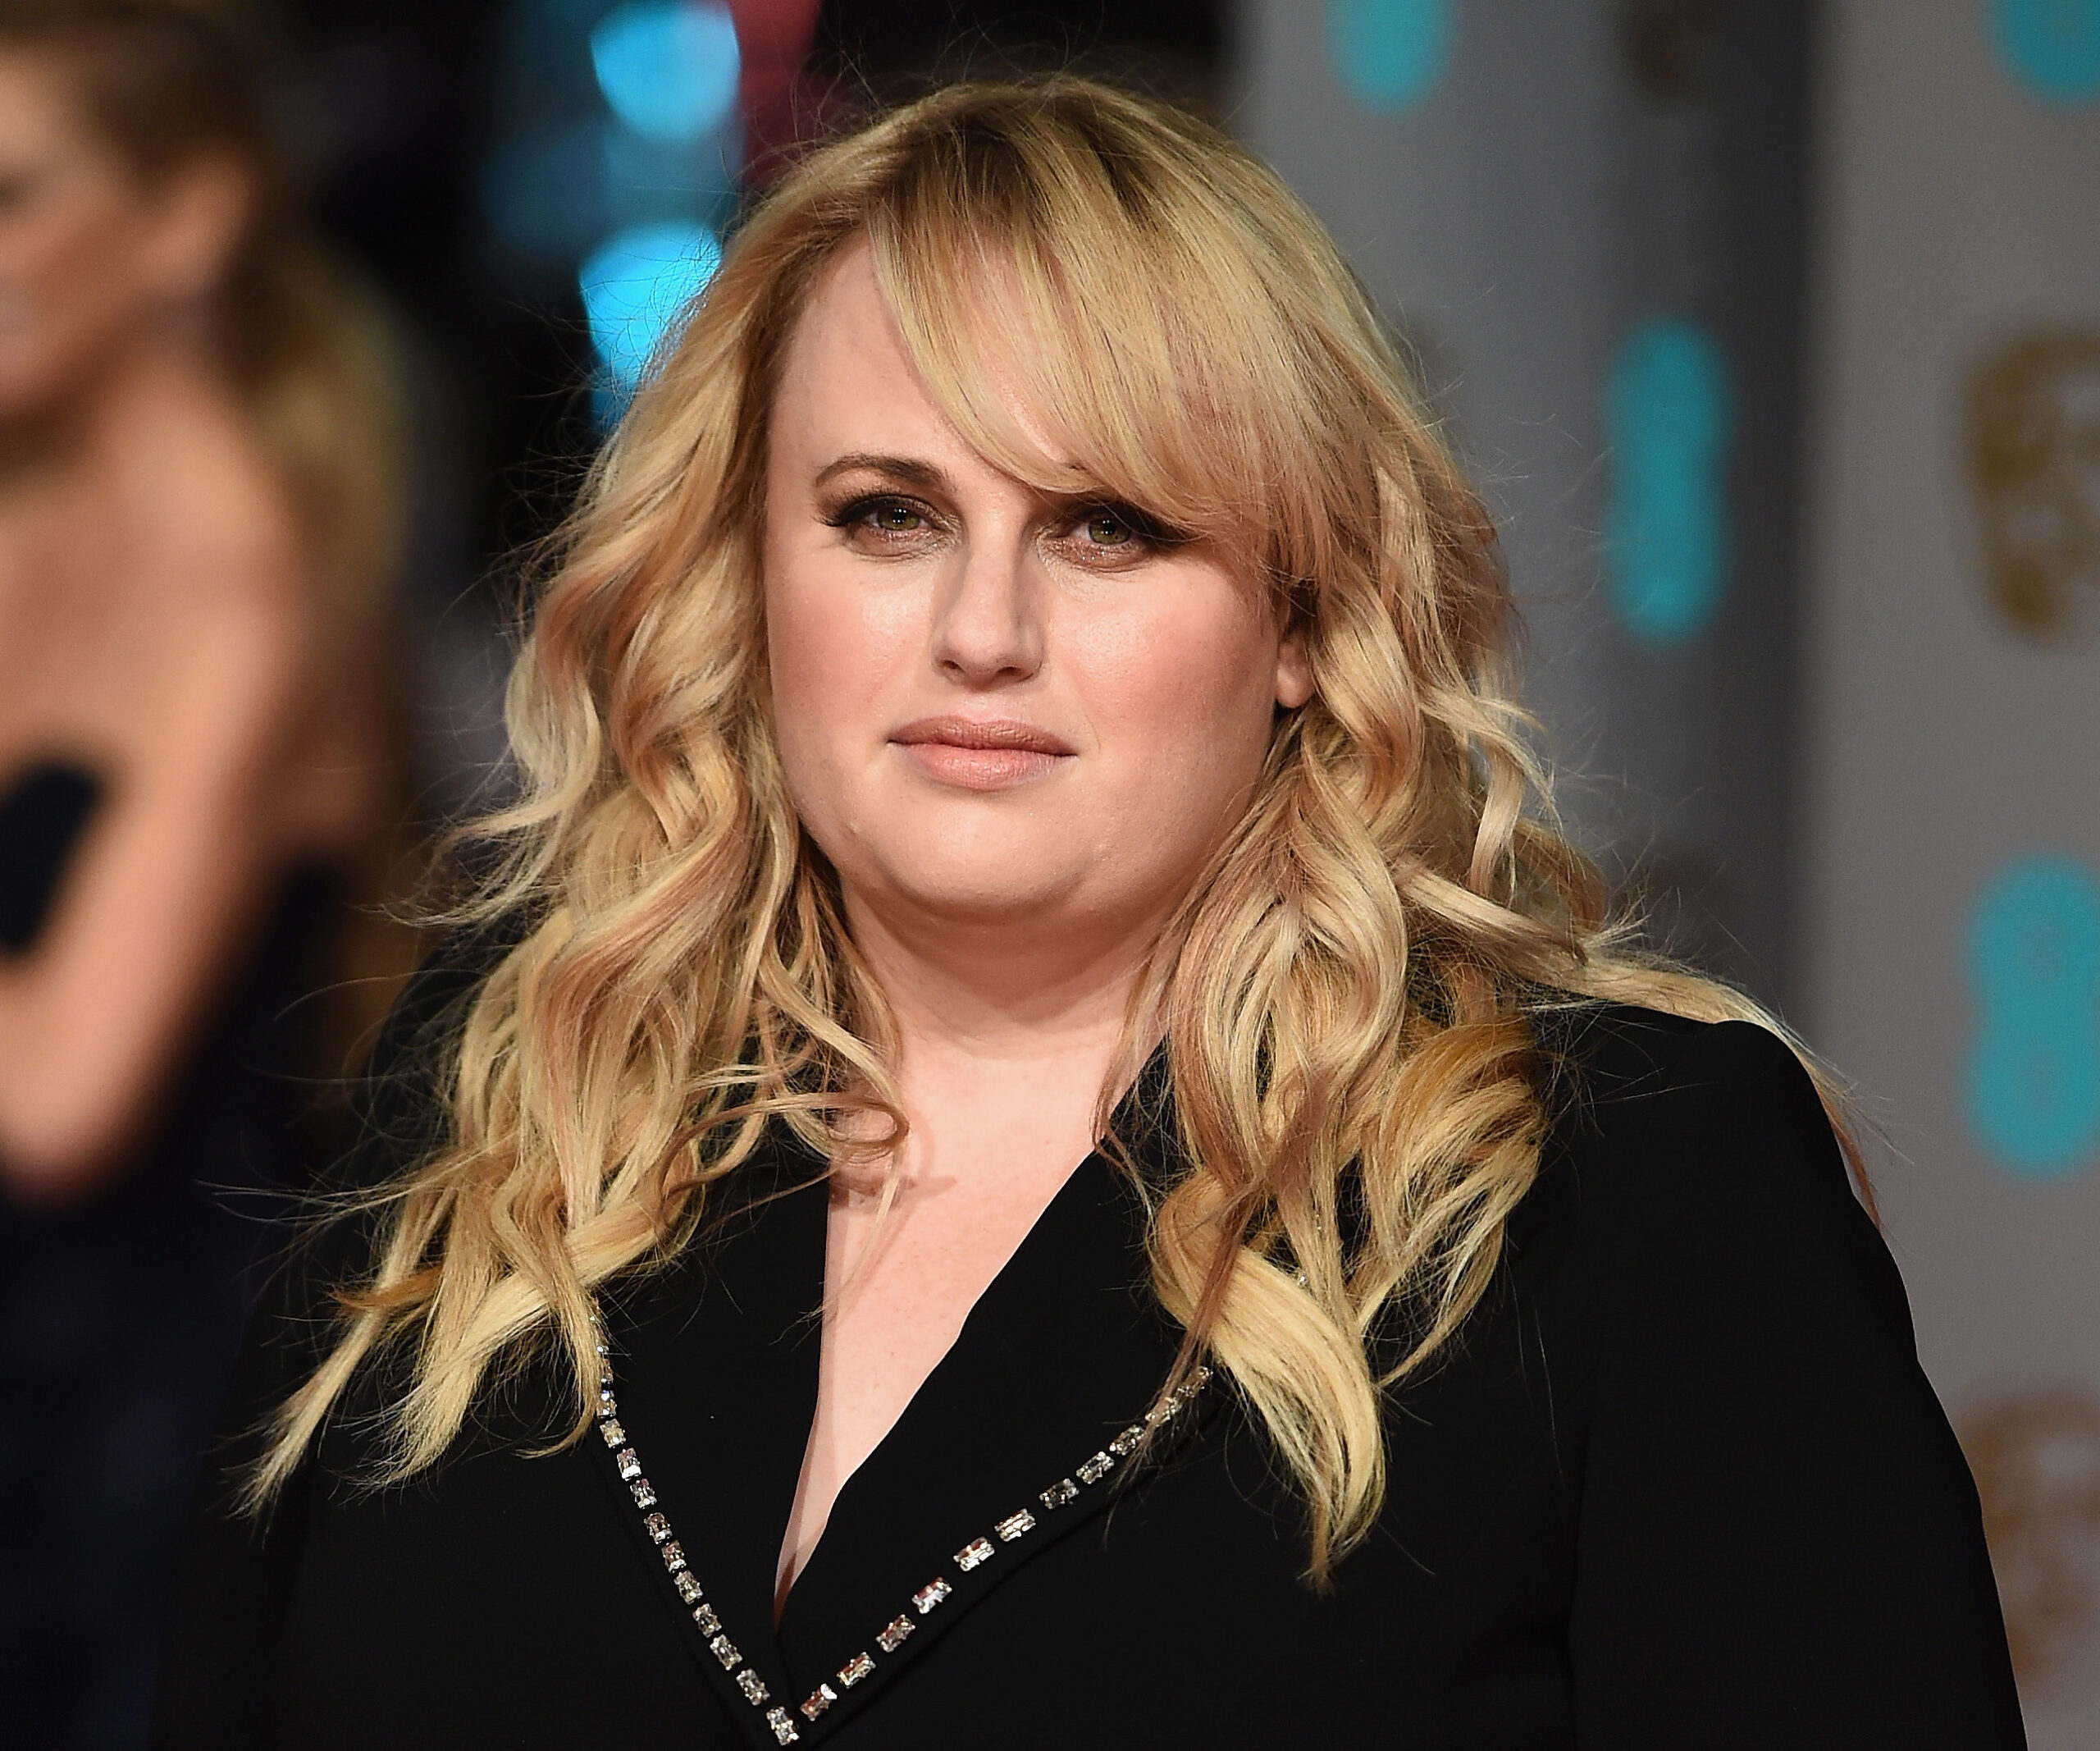 Rebel Wilson tweeted a woman’s face, calling her “total scum”